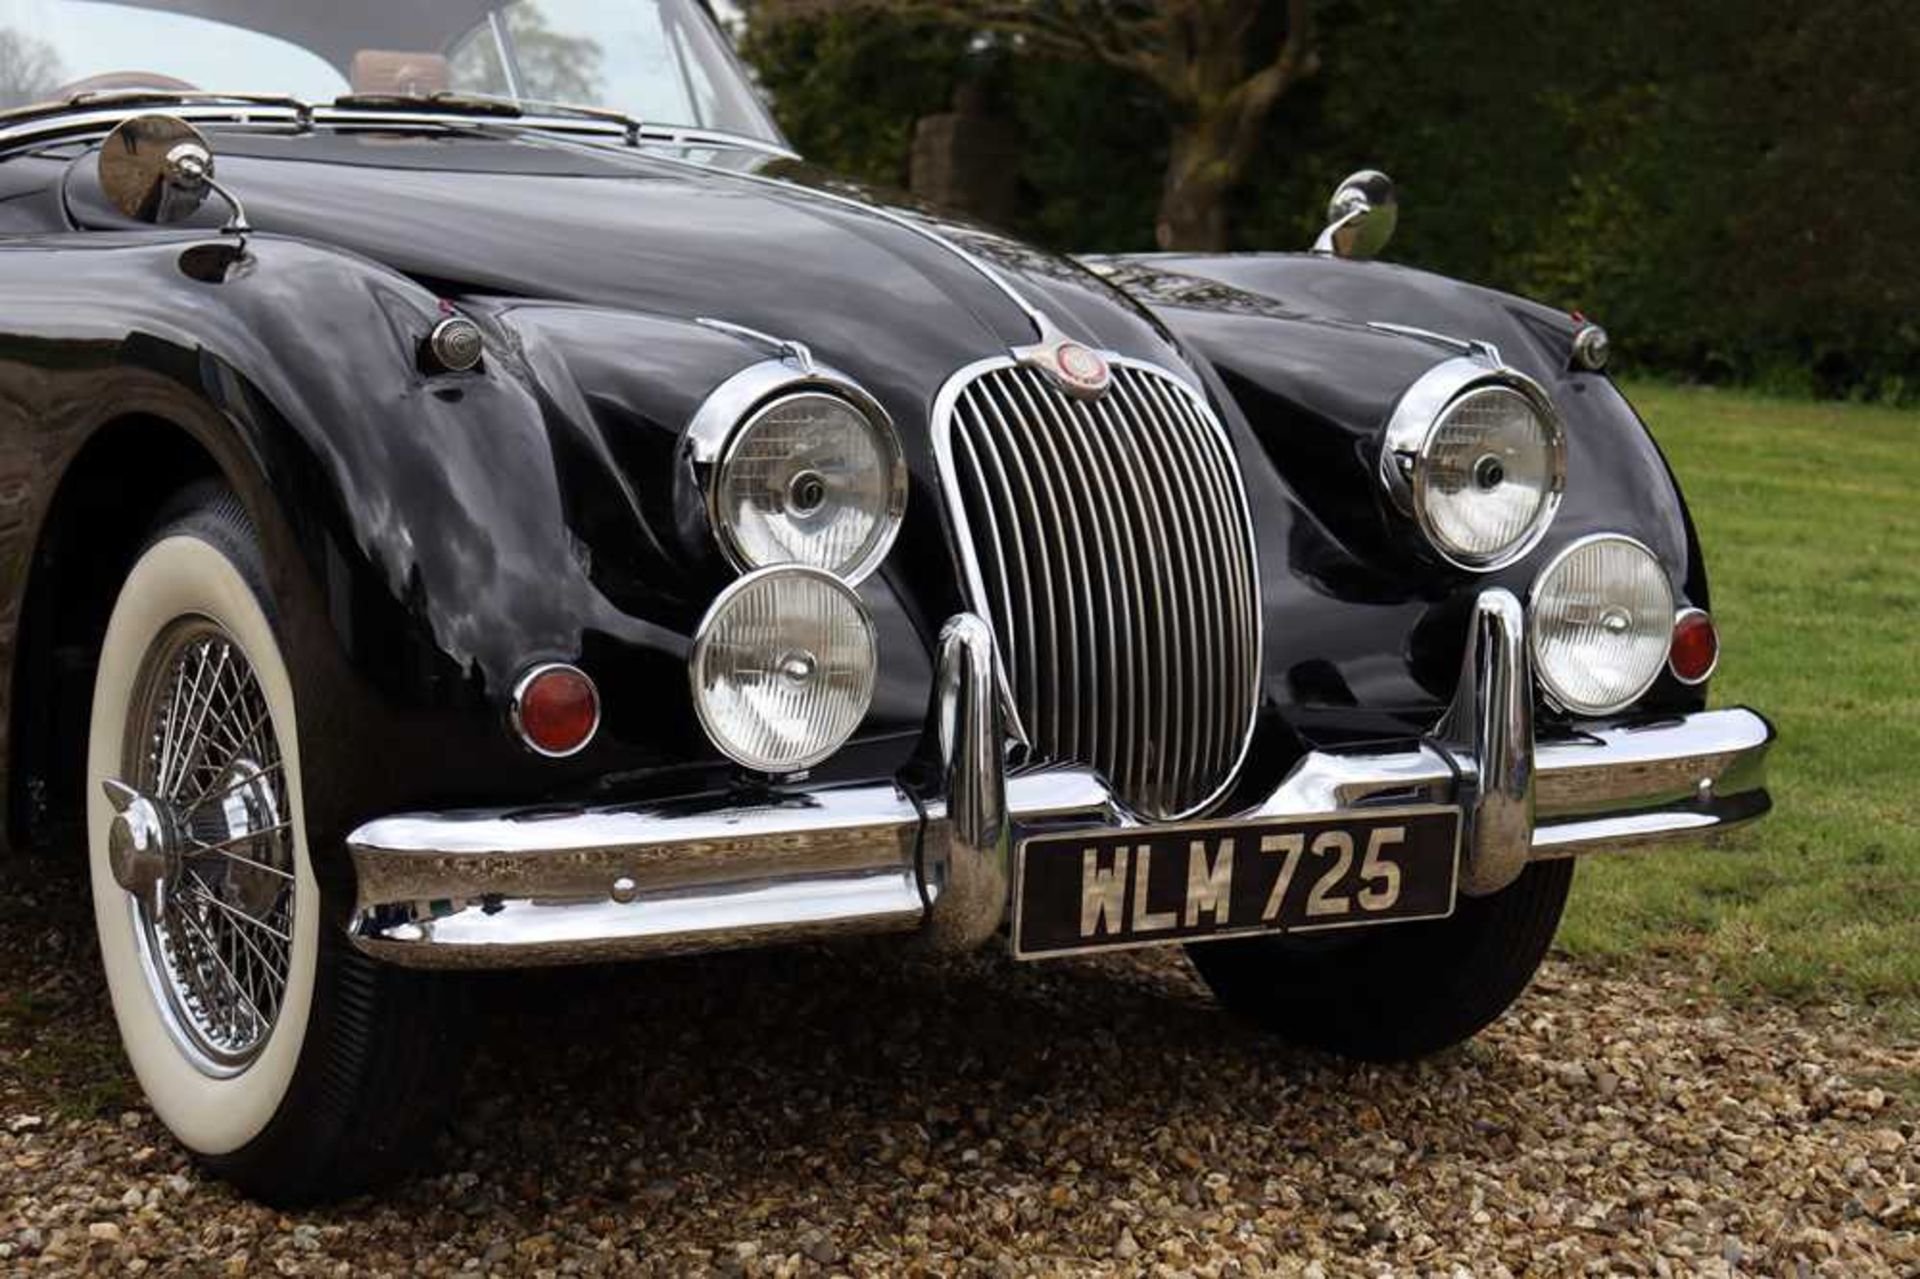 1959 Jaguar XK 150 Fixed Head Coupe 1 of just 1,368 RHD examples made - Image 32 of 49